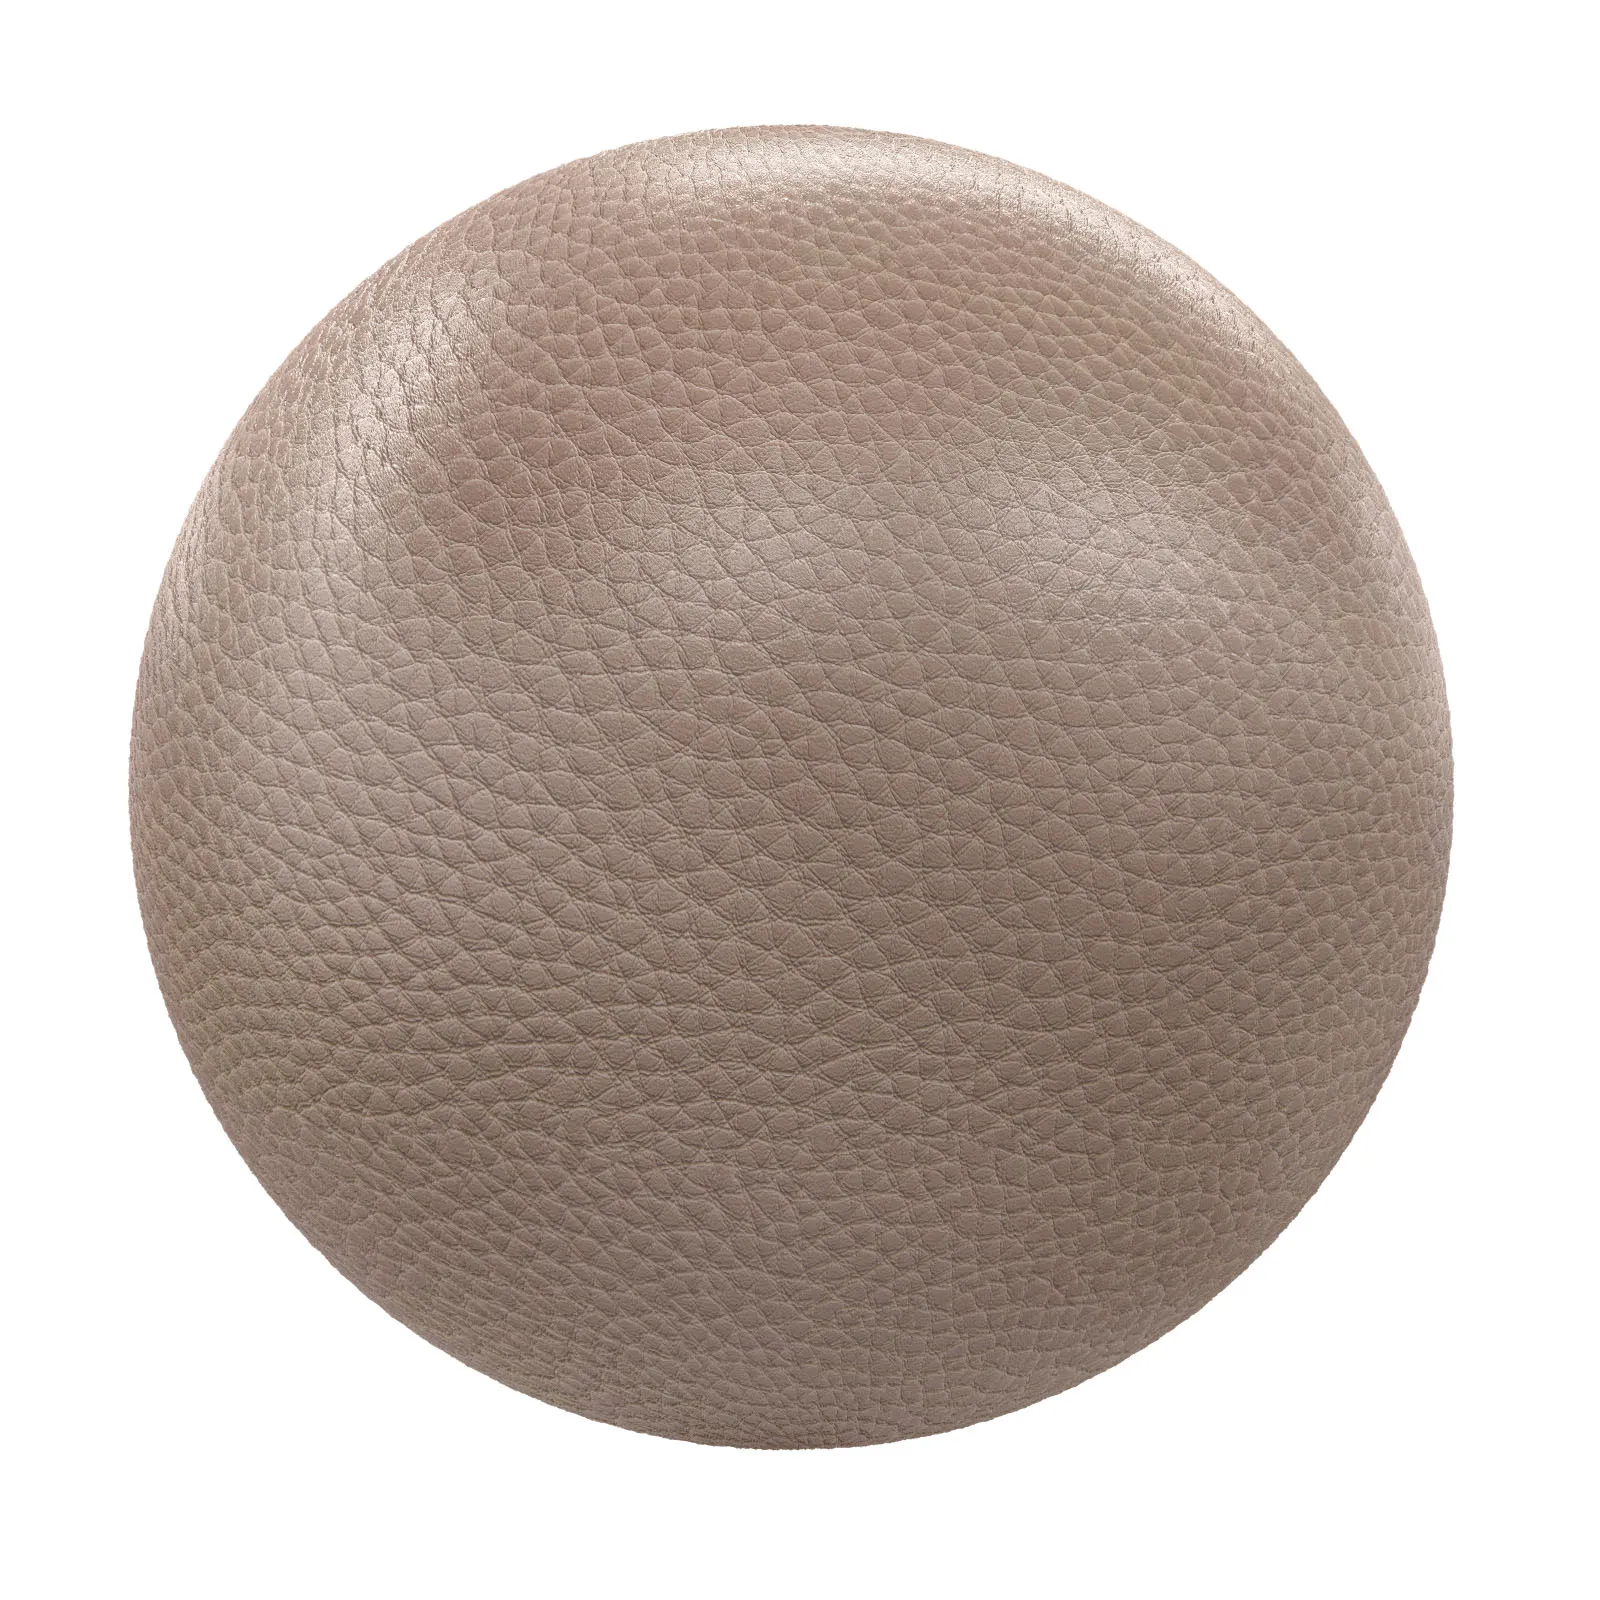 PBR CGAXIS TEXTURES – LEATHER – Beige Leather 6